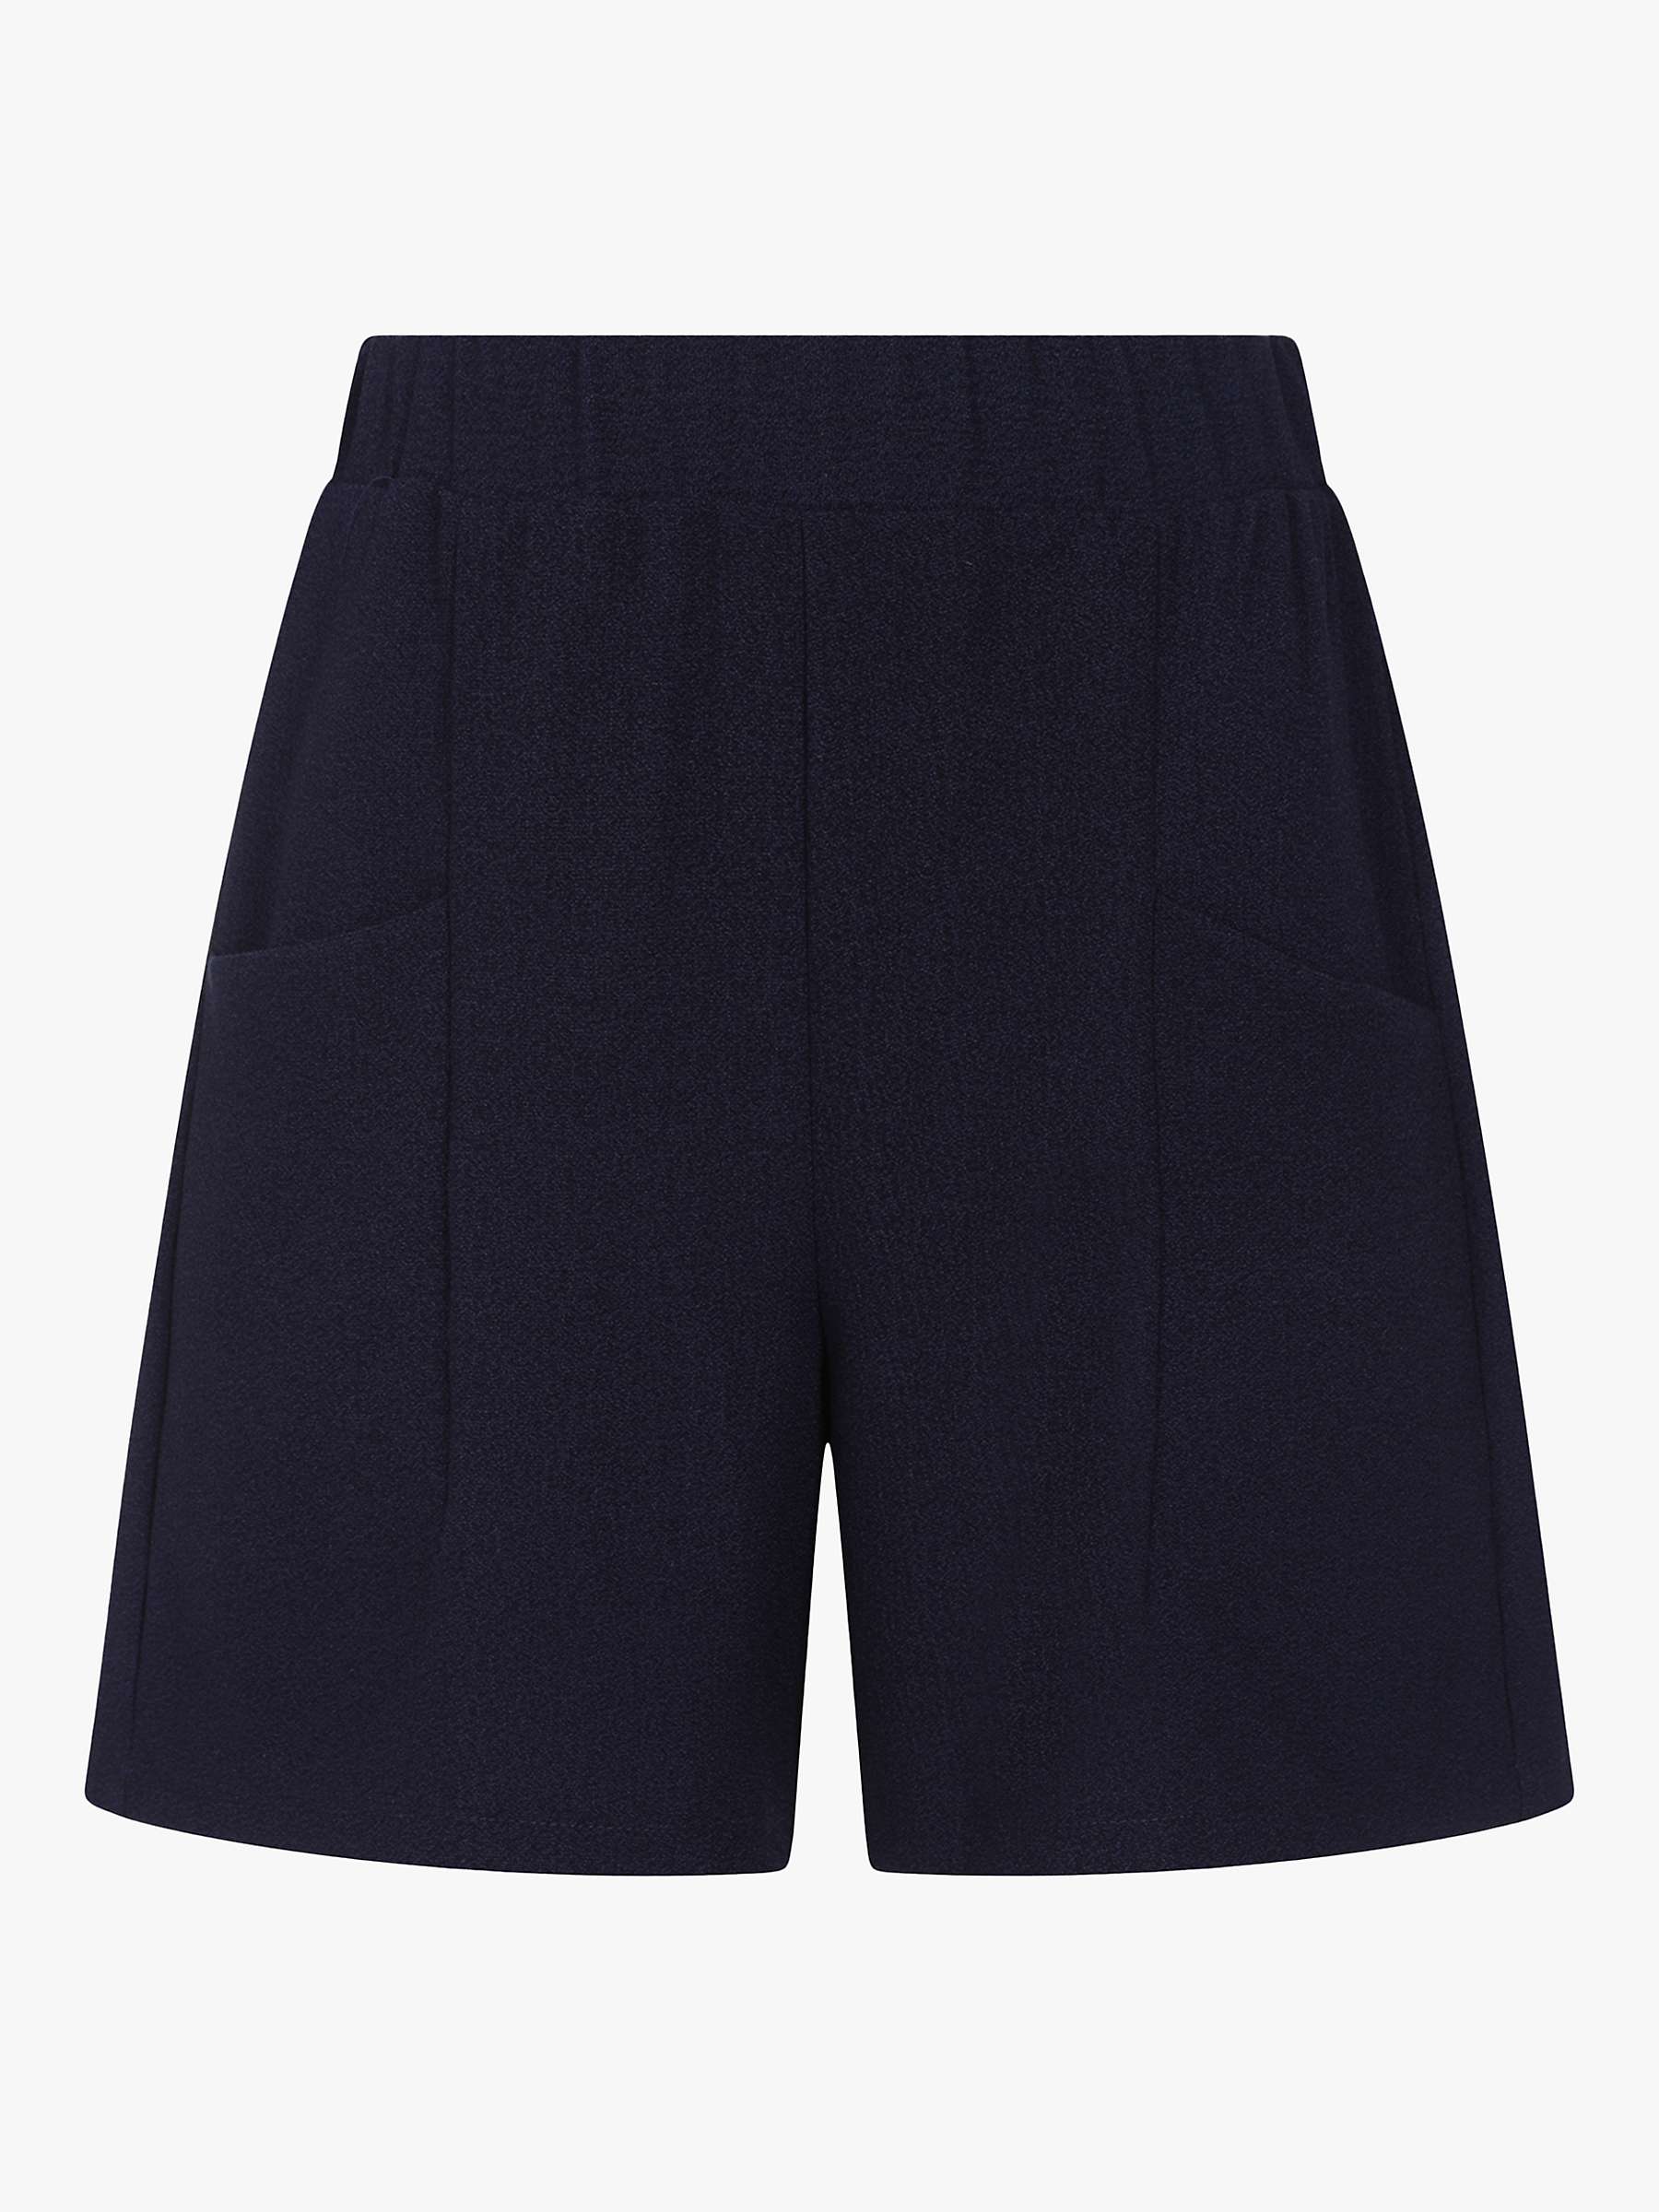 Buy HotSquash Luxe Crepe Shorts Online at johnlewis.com